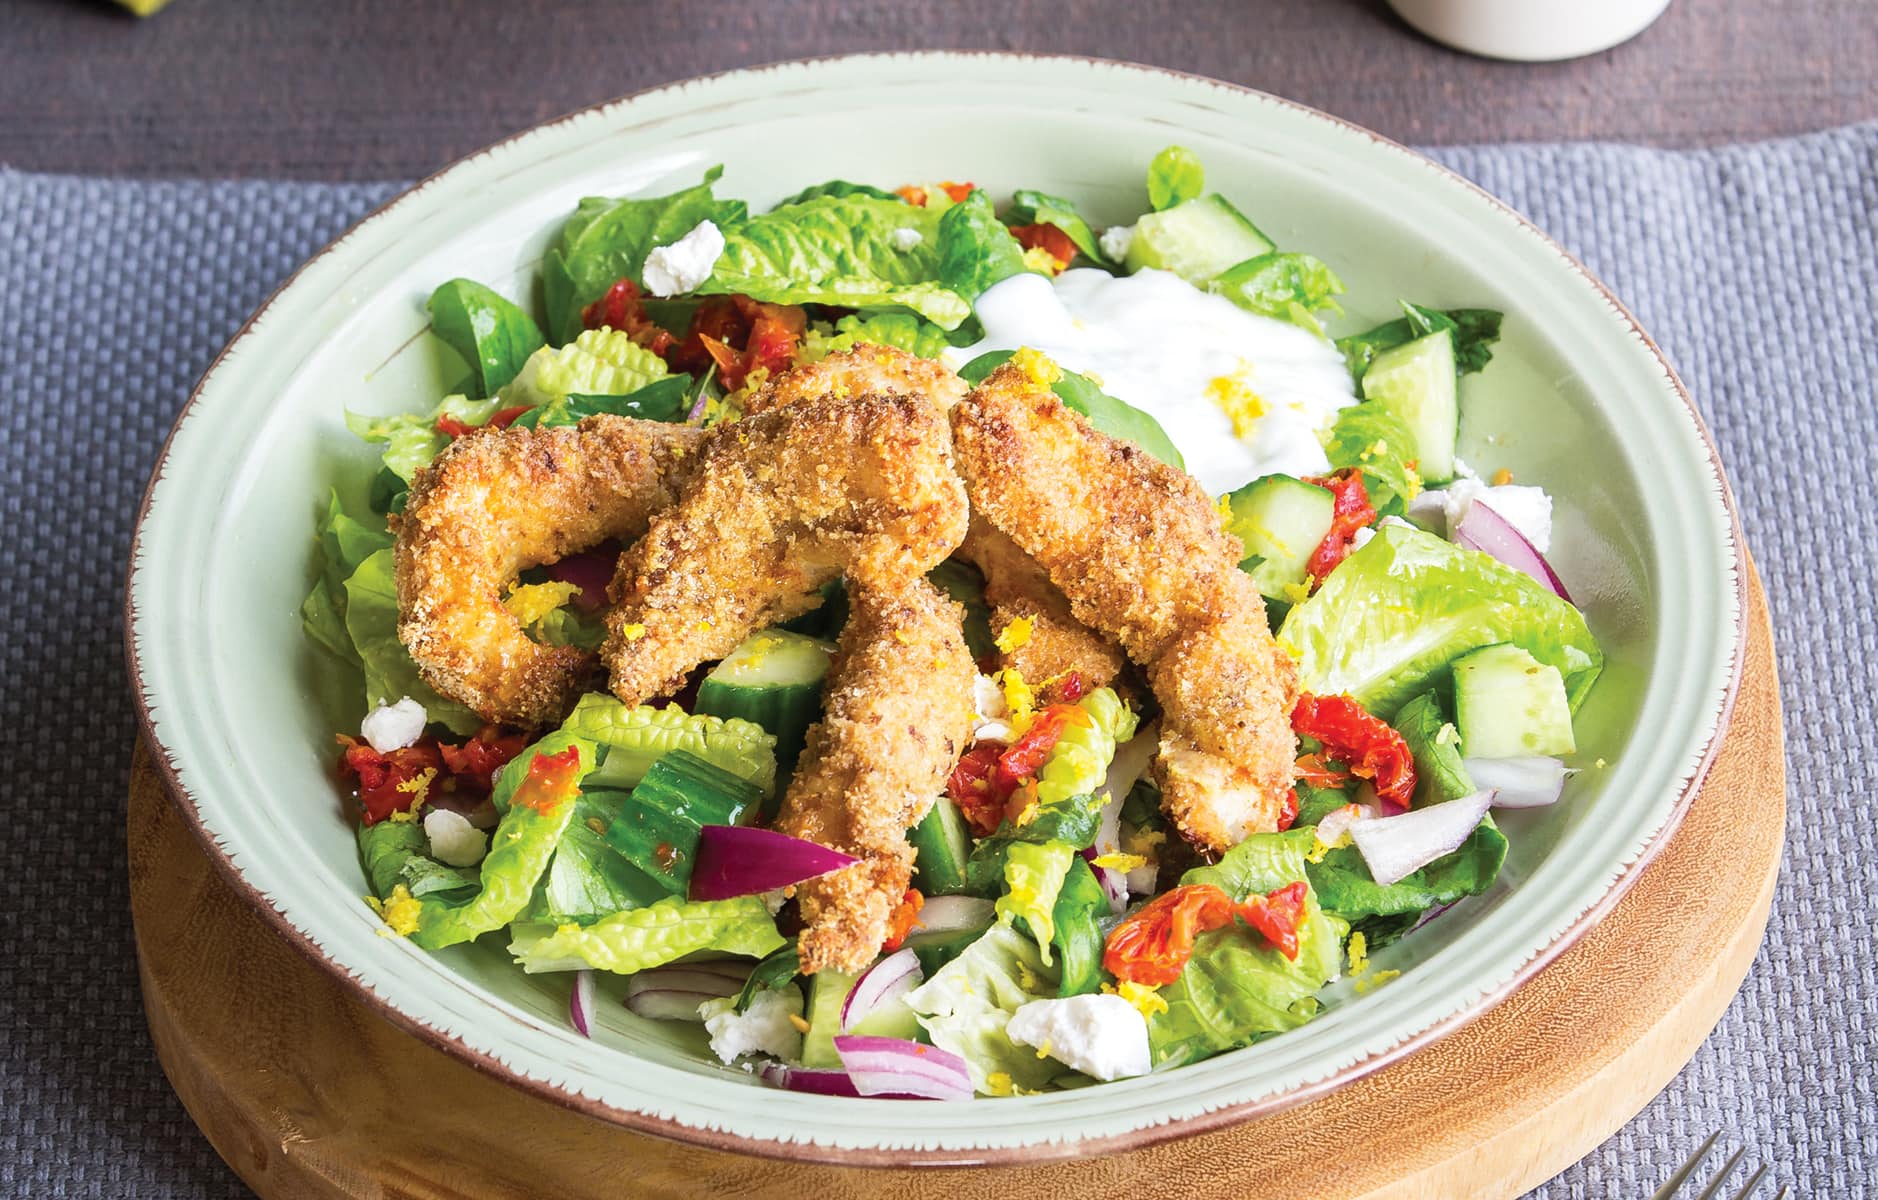 Crispy fish bites with salad and lemony dressing - Healthy Food Guide